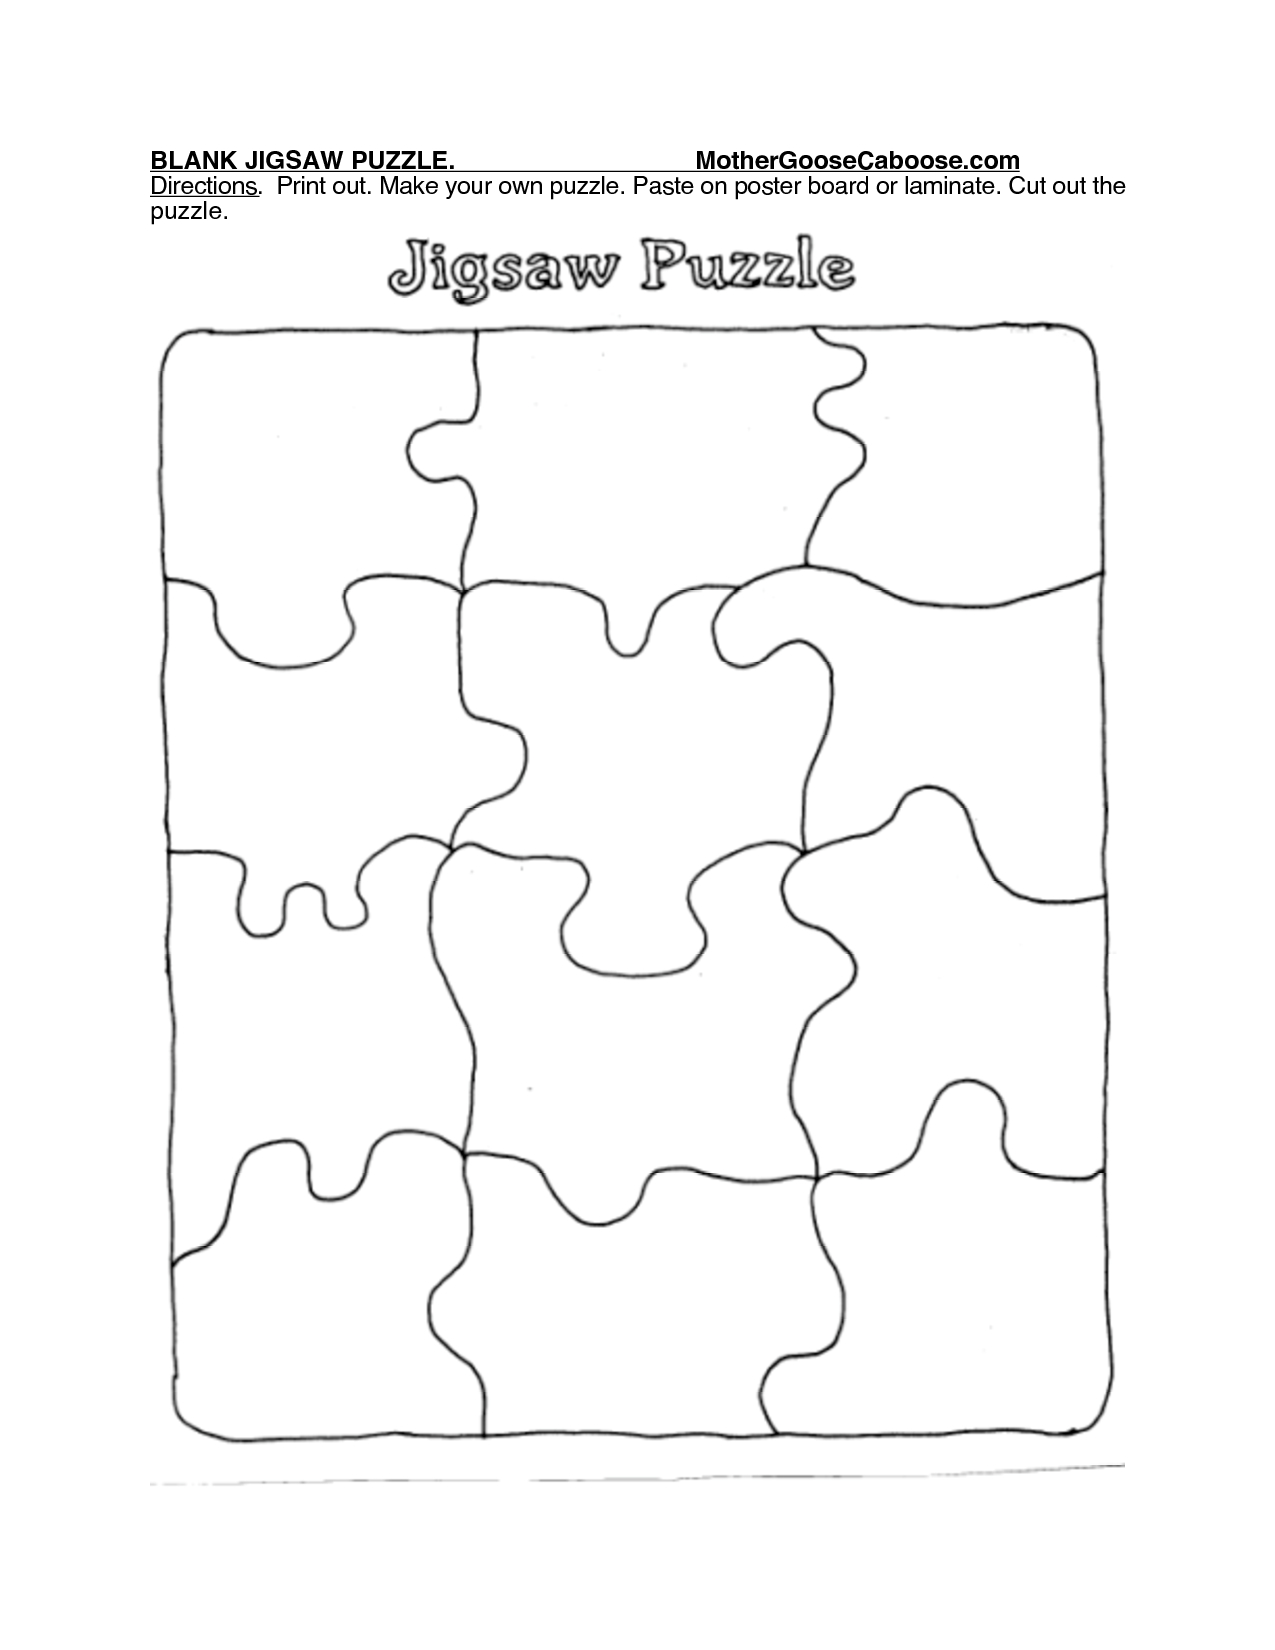 Printable Puzzle Piece Template | Search Results | New Calendar - Printable Puzzles Template